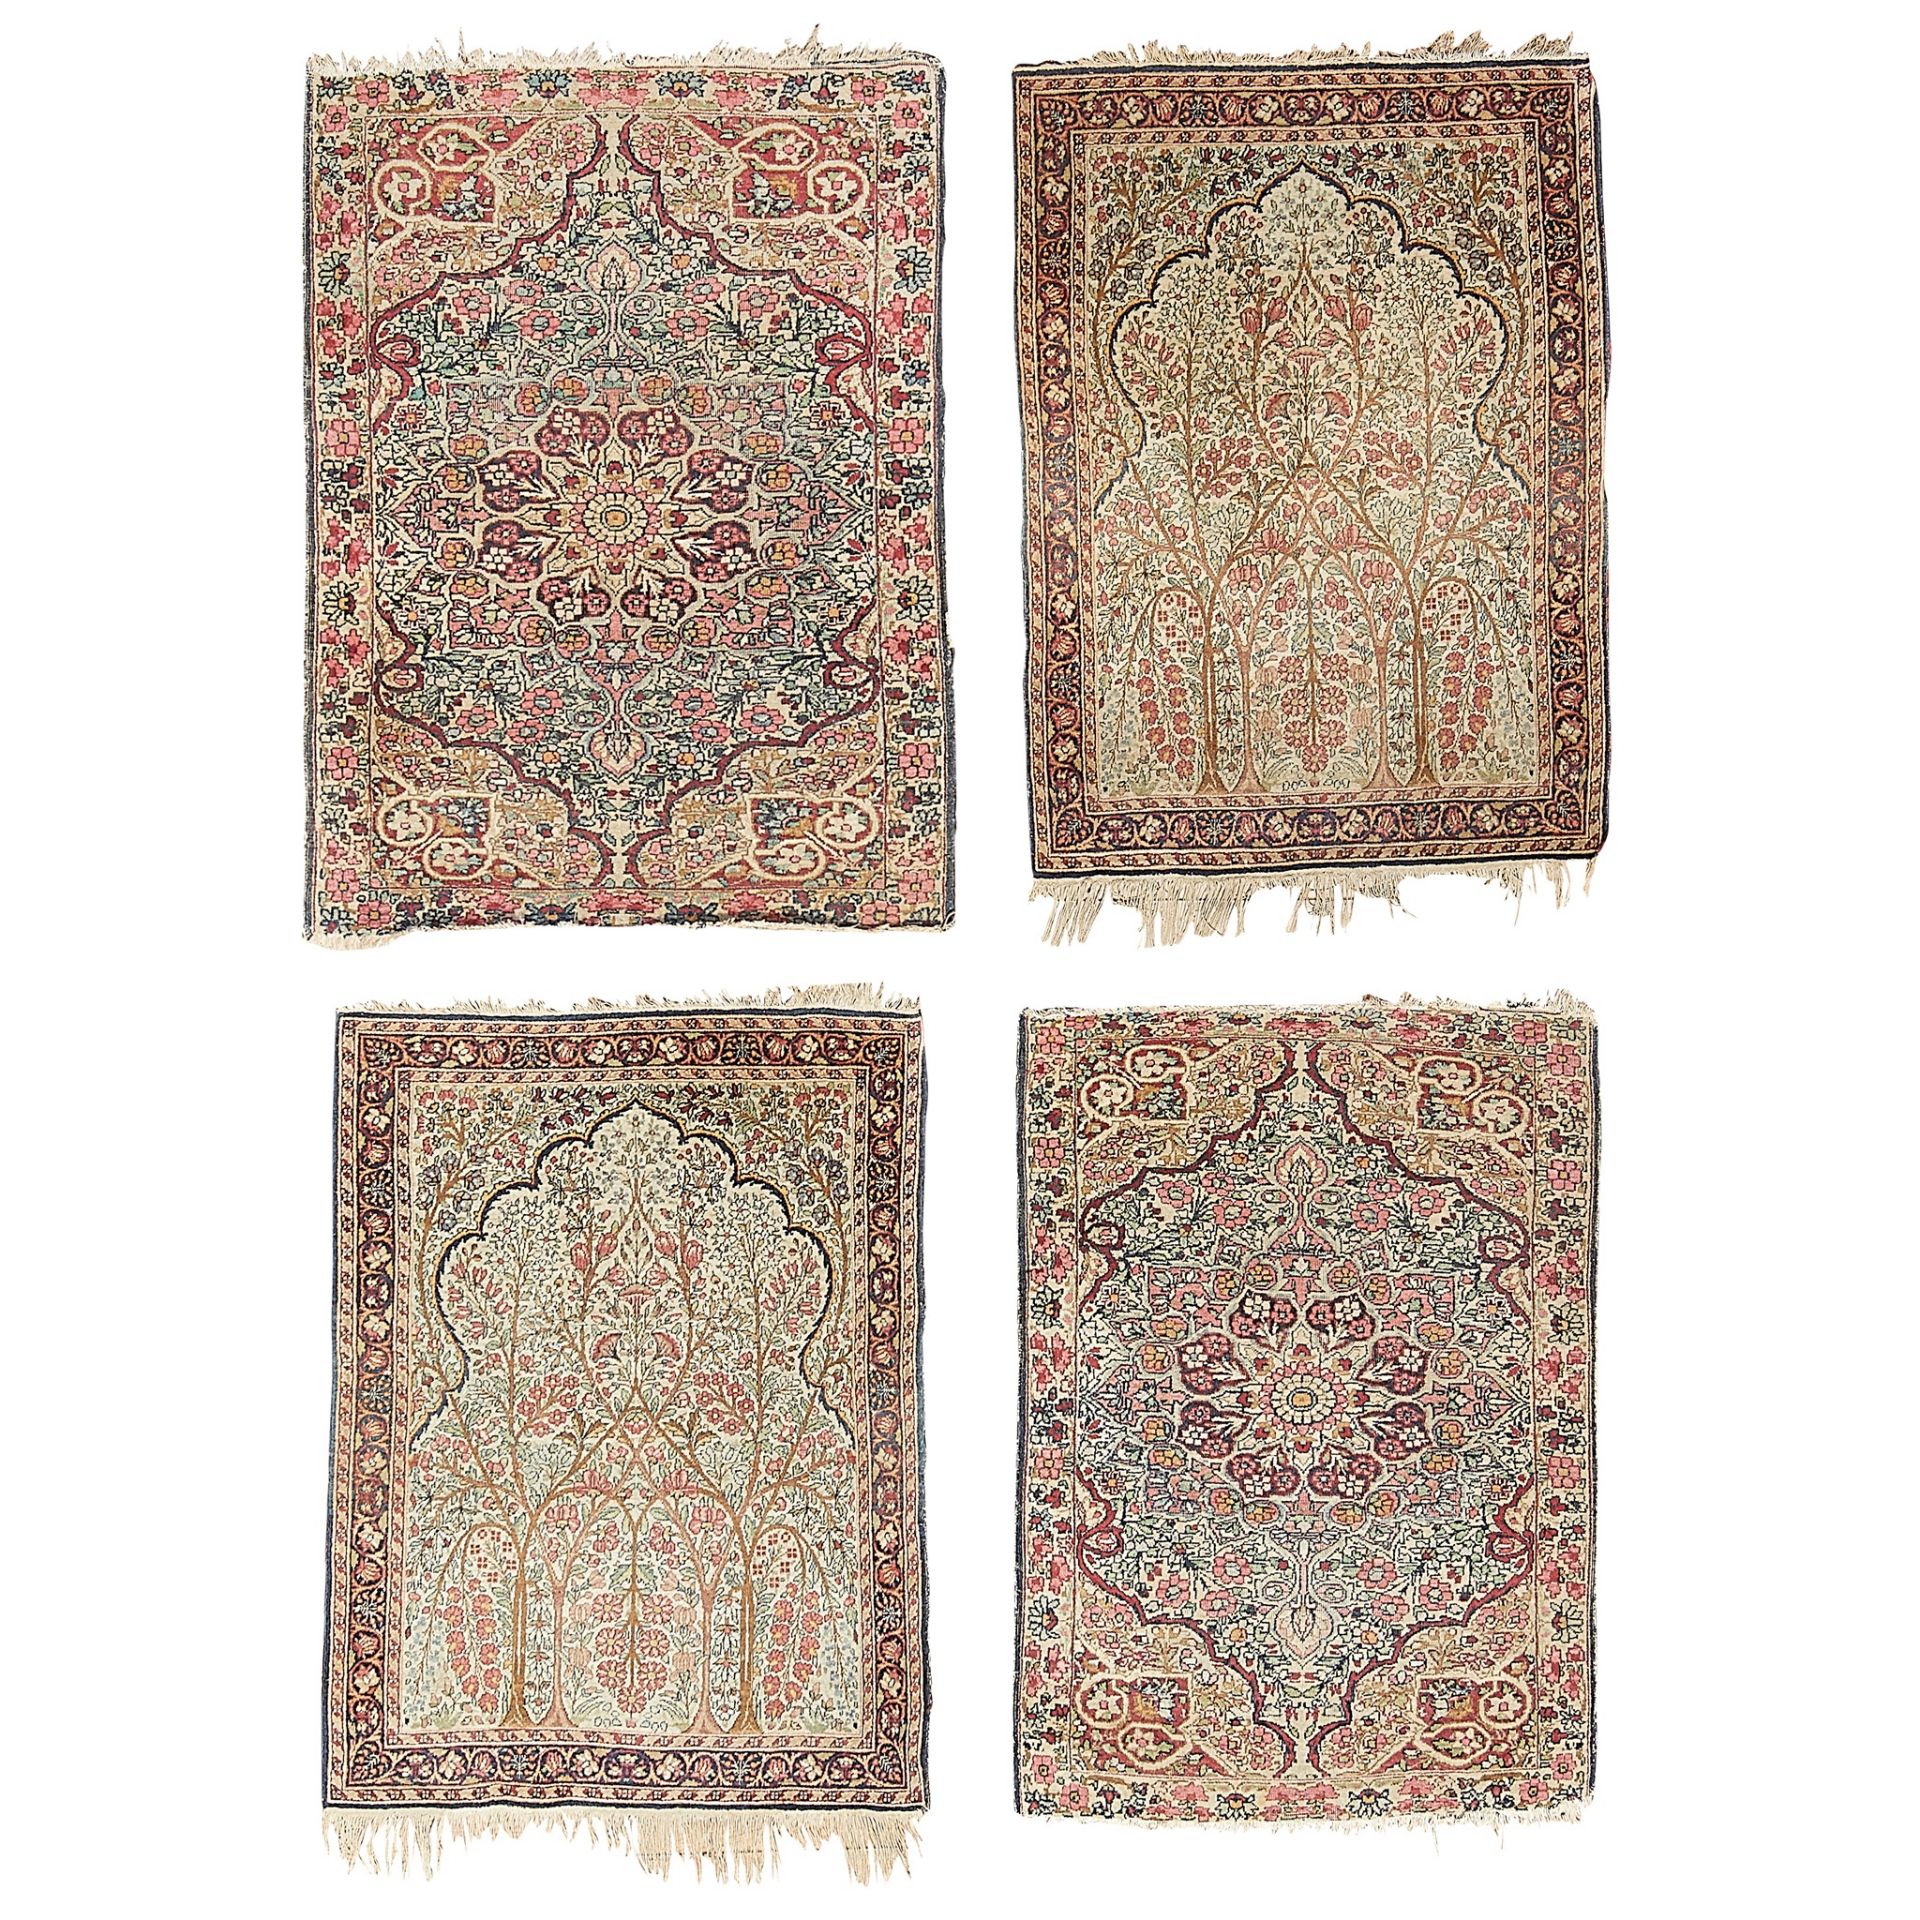 TWO PAIRS OF KIRMAN MATS CENTRAL PERSIA, LATE 19TH/EARLY 20TH CENTURY